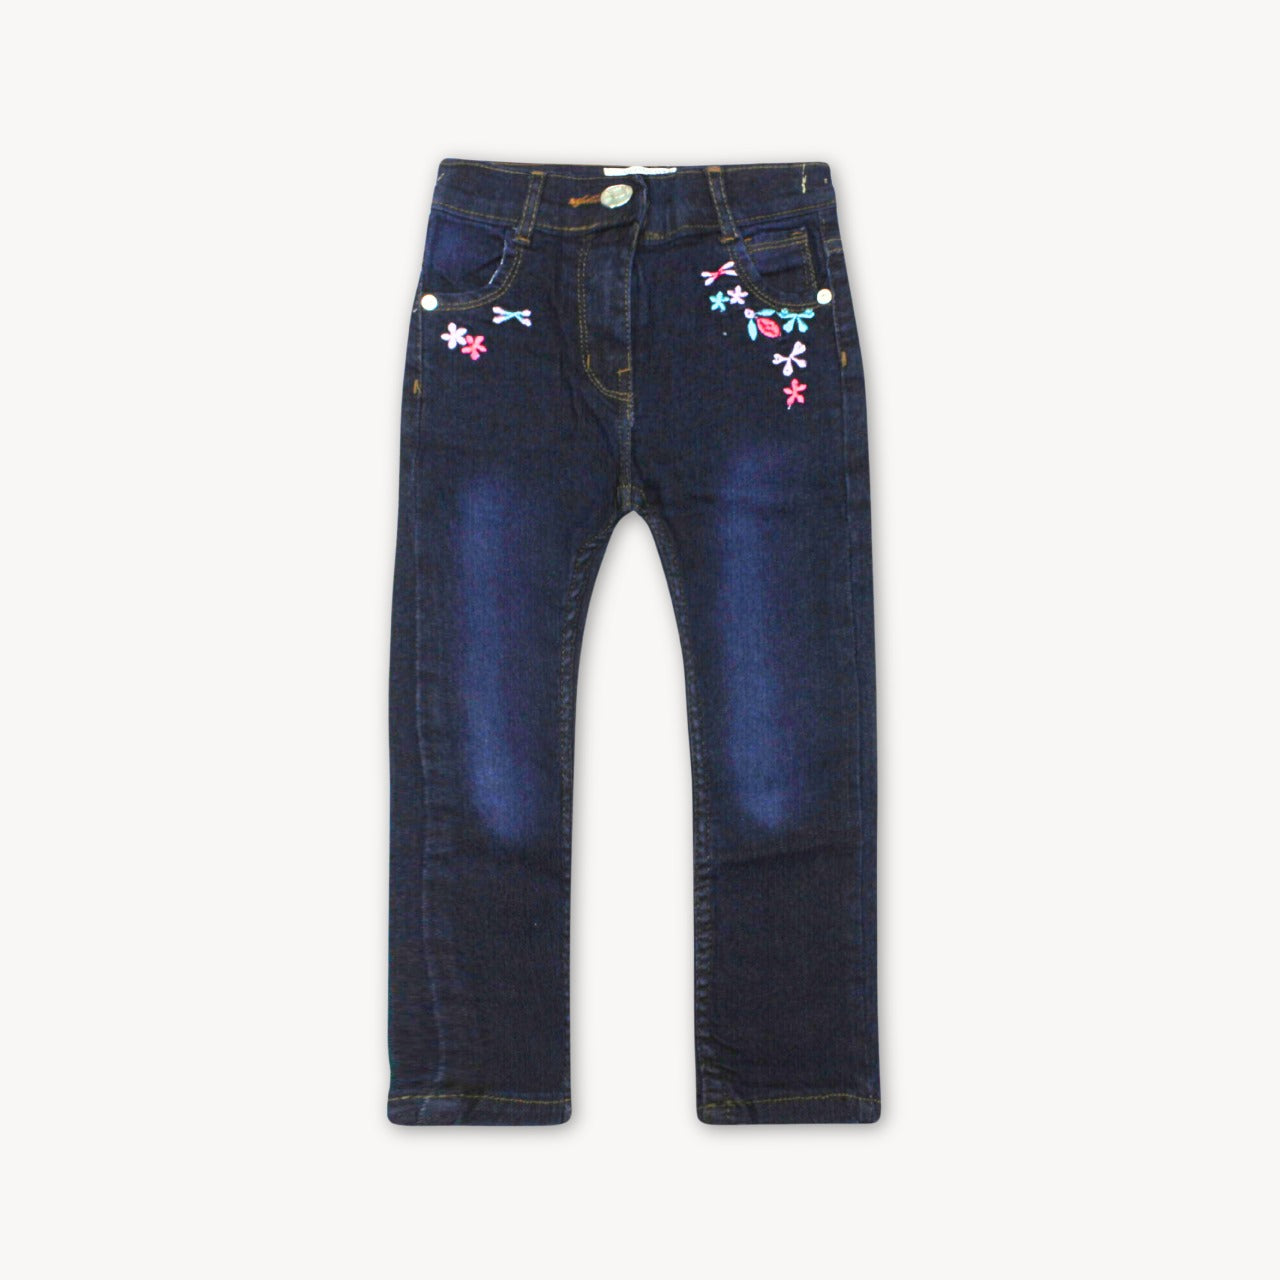 Dark Navy Blue Floral and Ribbon Embroidered Denim Jeans